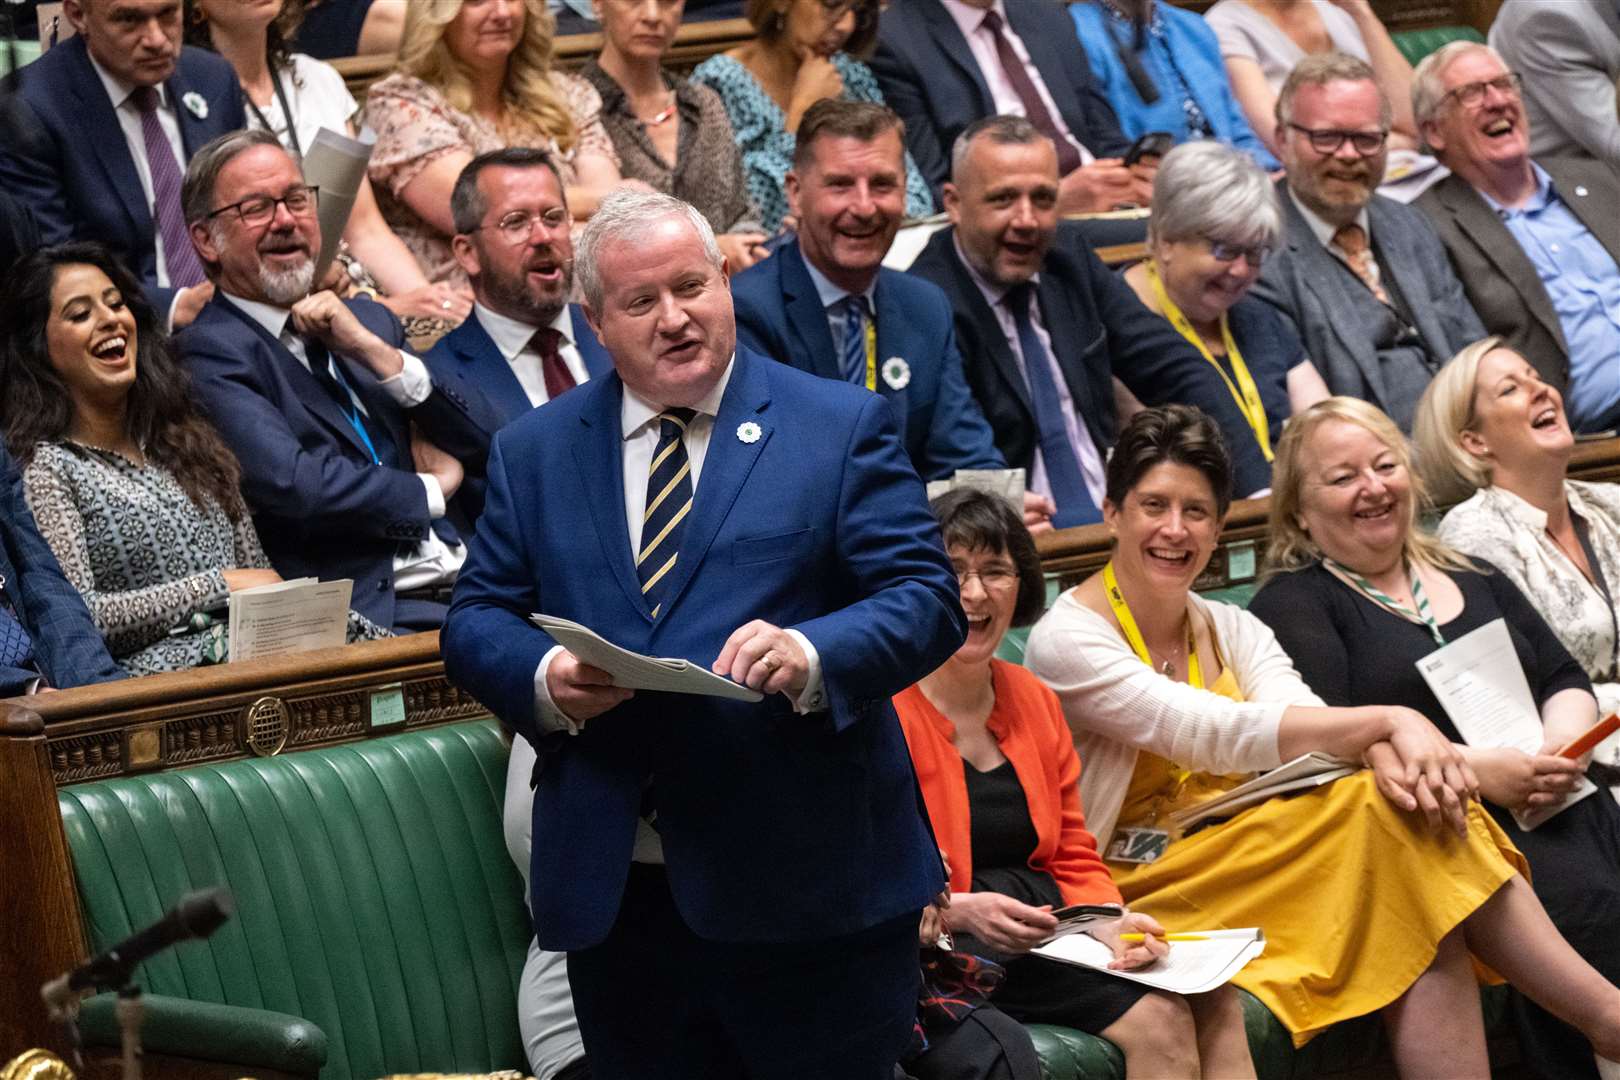 Ian Blackford said that “Westminster has never looked so arrogant and out of touch” (Andy Bailey/UK Parliament/PA)